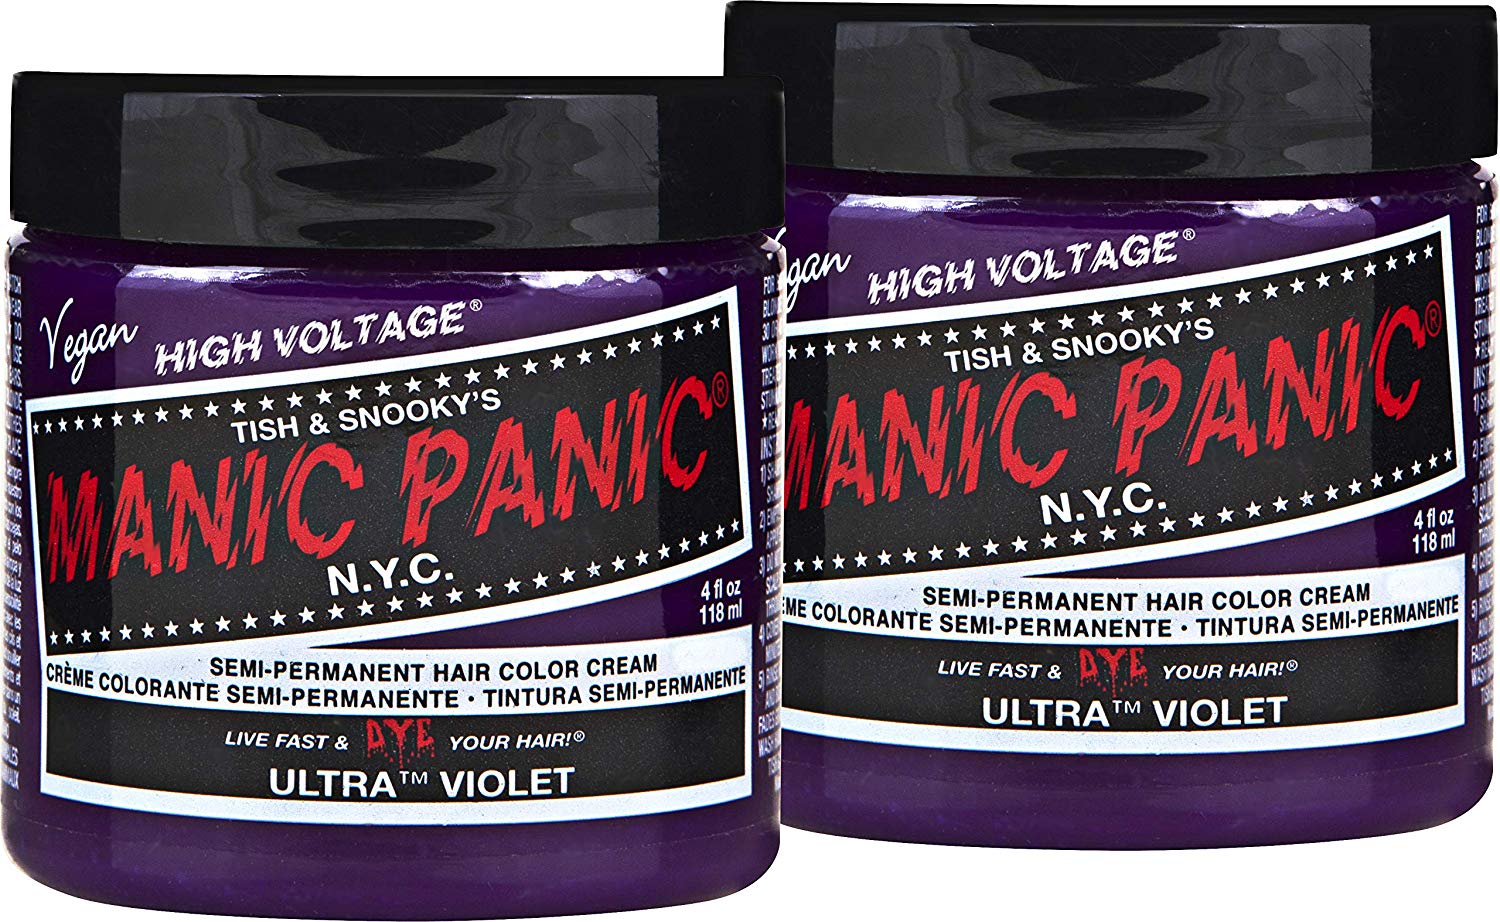 3. "The Best Blue and Purple Hair Dyes for Vibrant Color" - wide 1